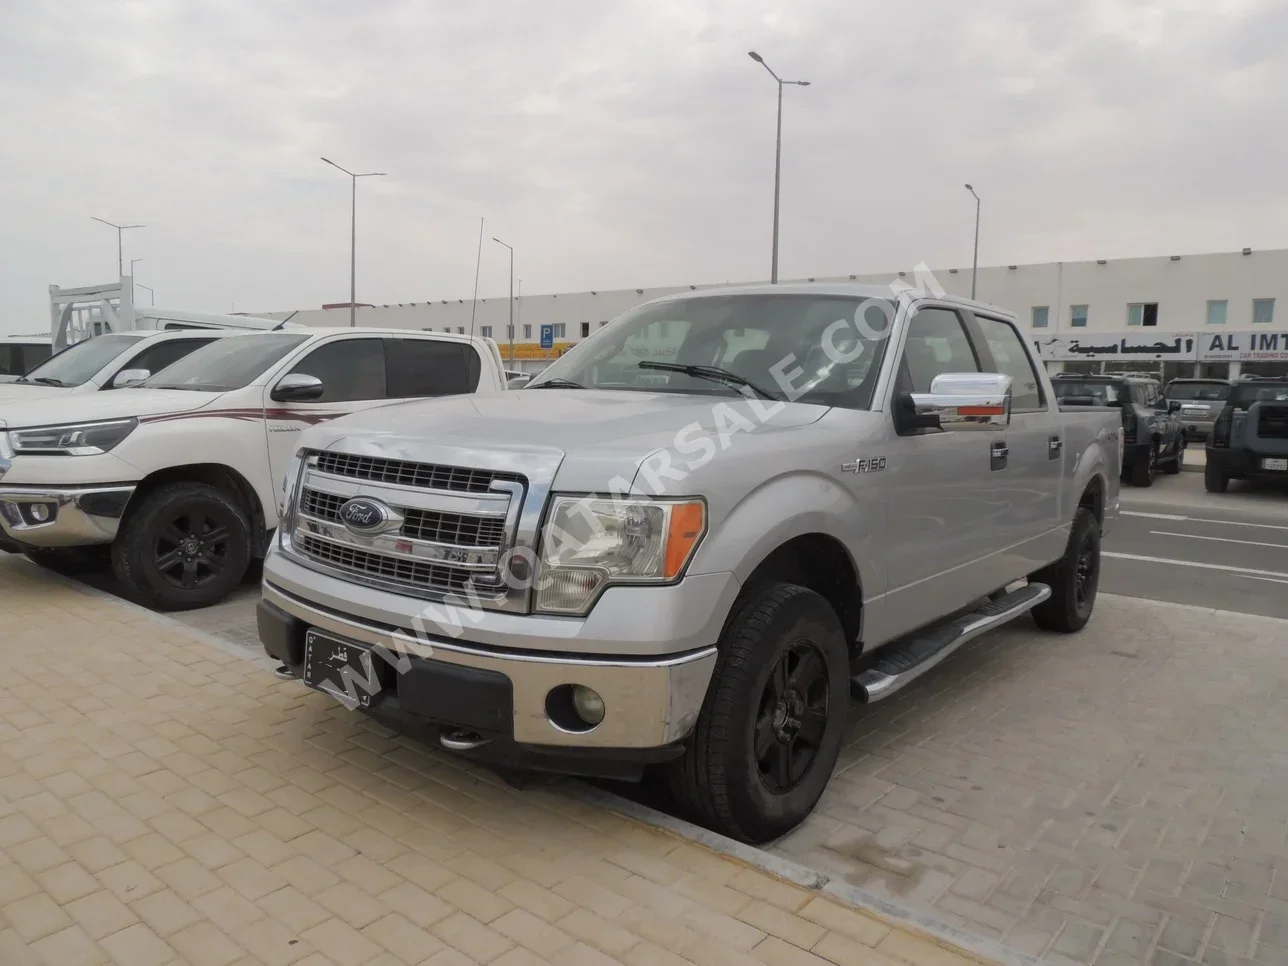 Ford  F  150  2013  Automatic  316,000 Km  8 Cylinder  Four Wheel Drive (4WD)  Pick Up  Silver